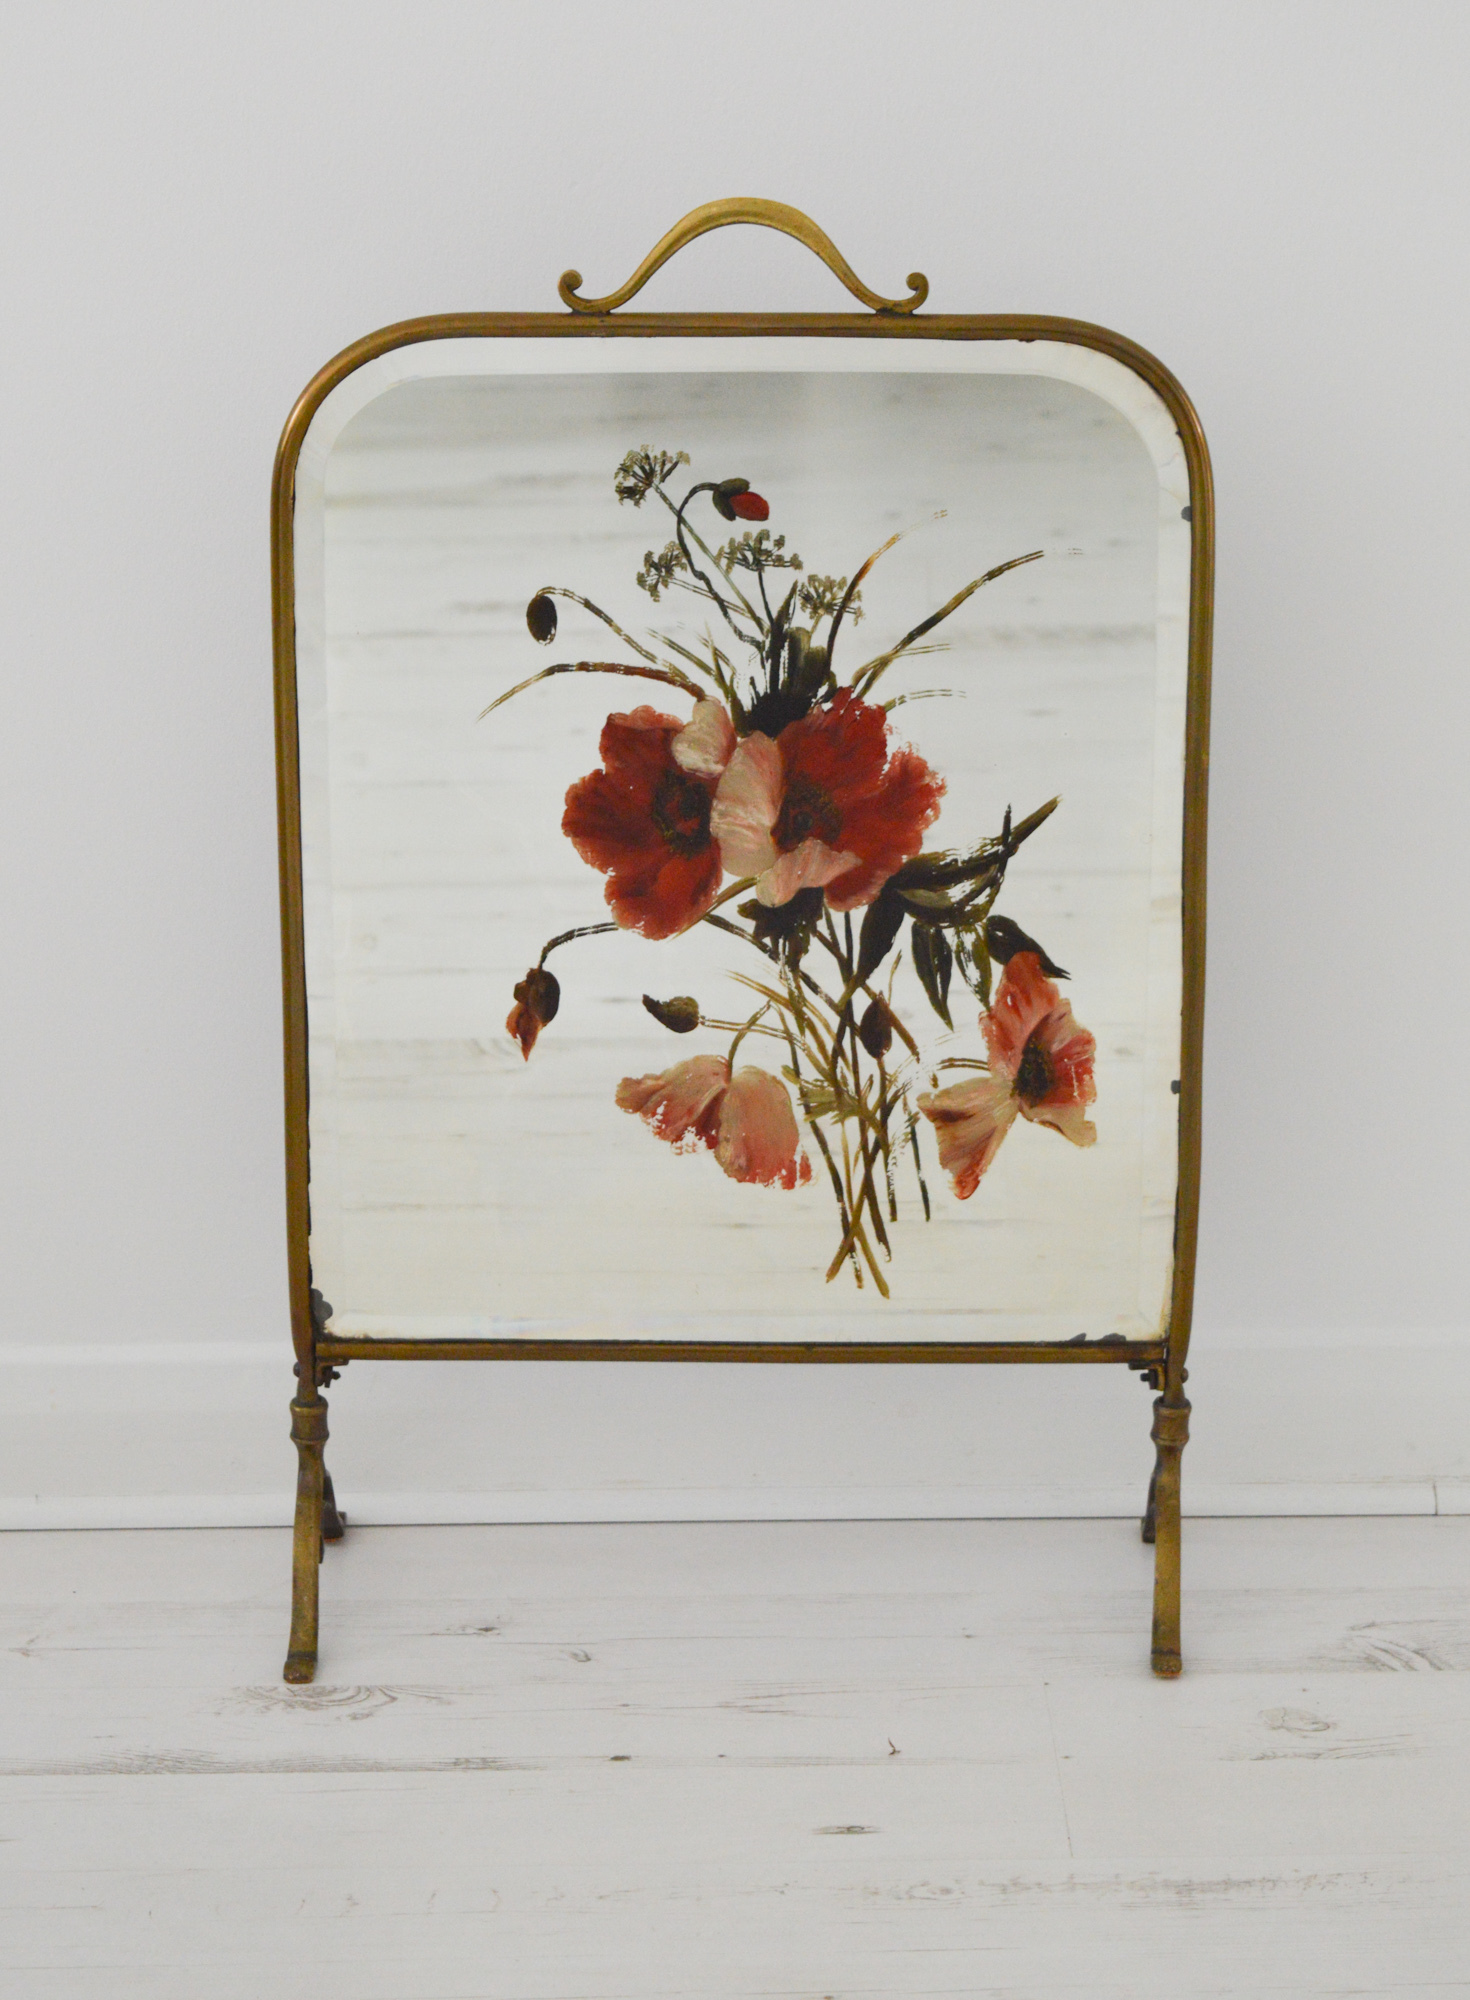 Art Deco Fireplace Screen Inspirational French 1930s Brass Mirrored Fire Screen with Hand Painted Flowers Bevelled Mirror Glass Vintage Antique Art Nouveau Fireplace Screen